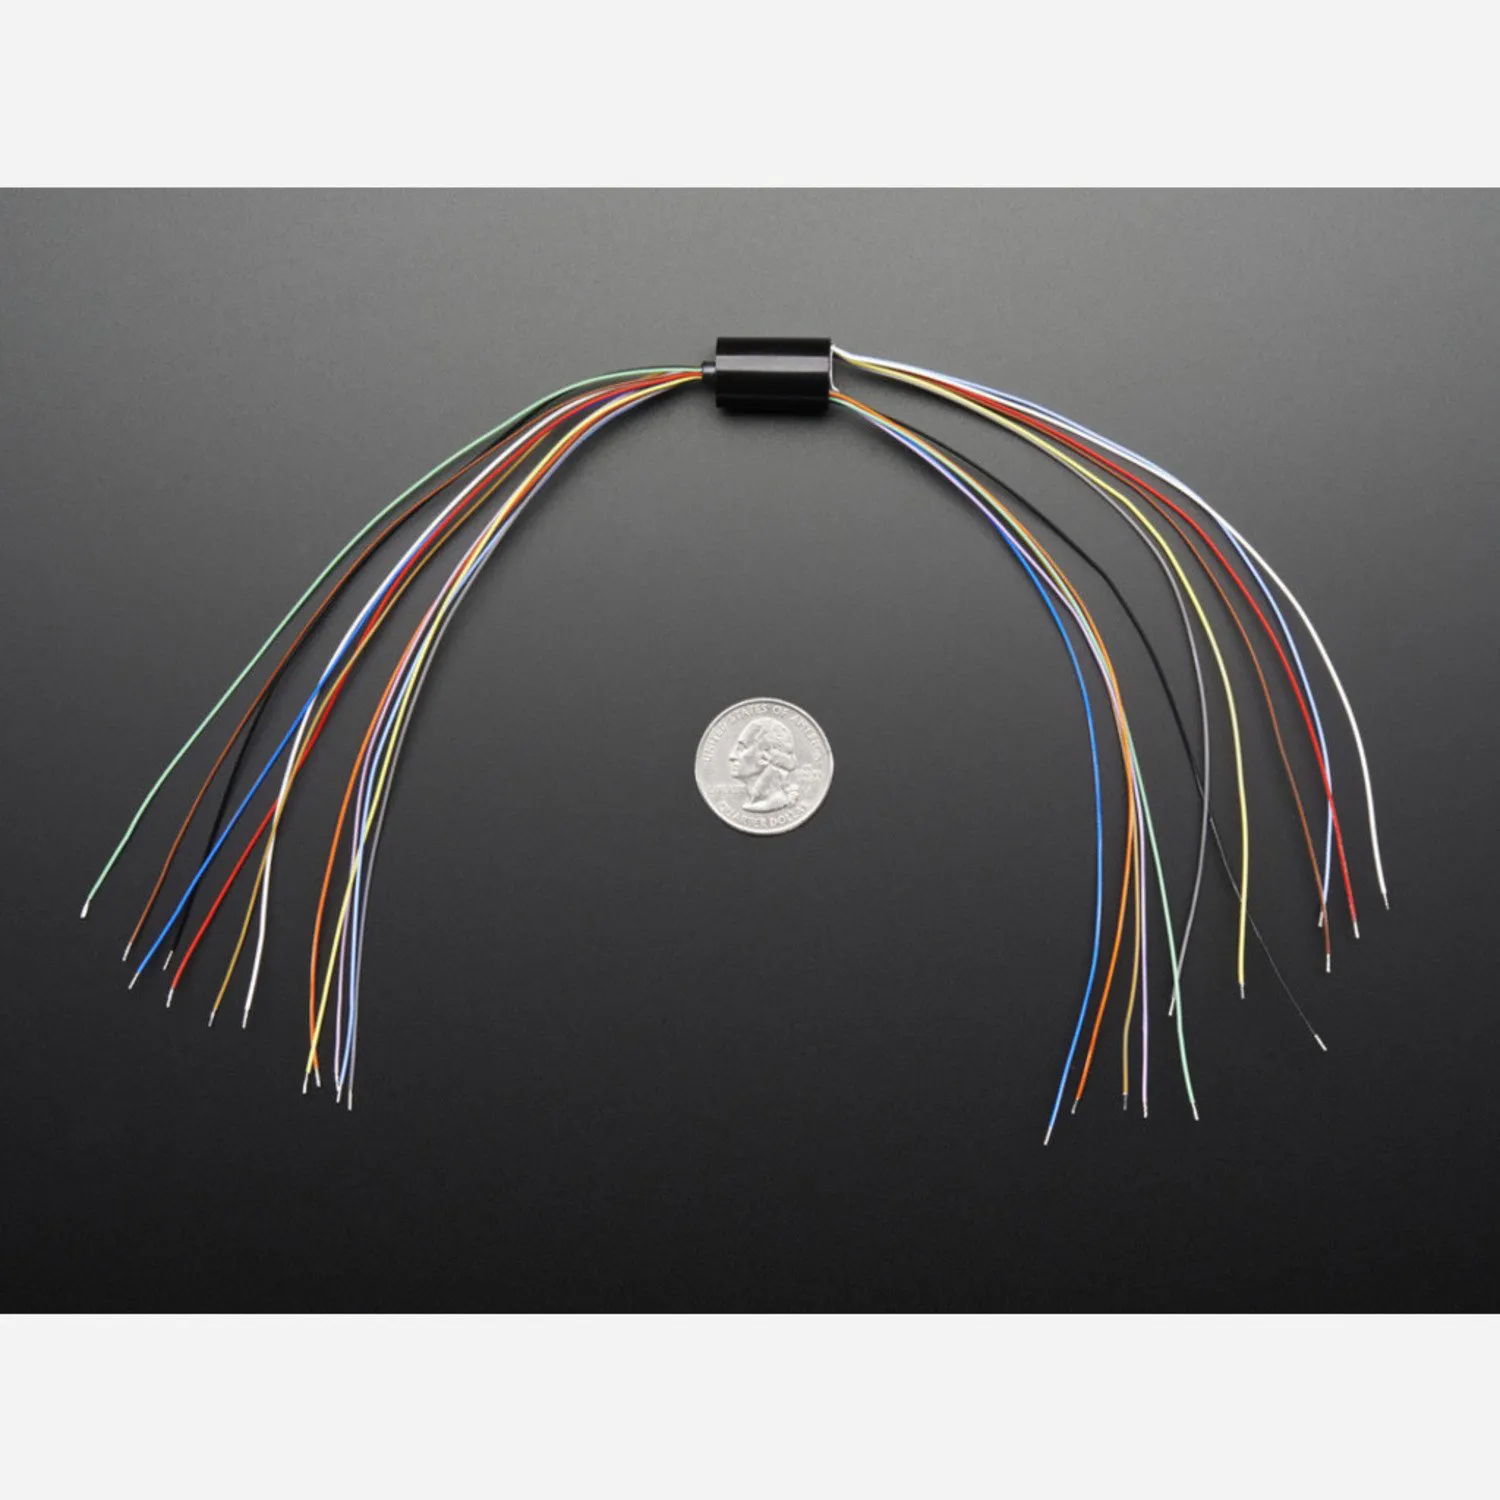 Photo of Miniature Slip Ring - 12mm diameter, 12 wires, max 240V @ 2A